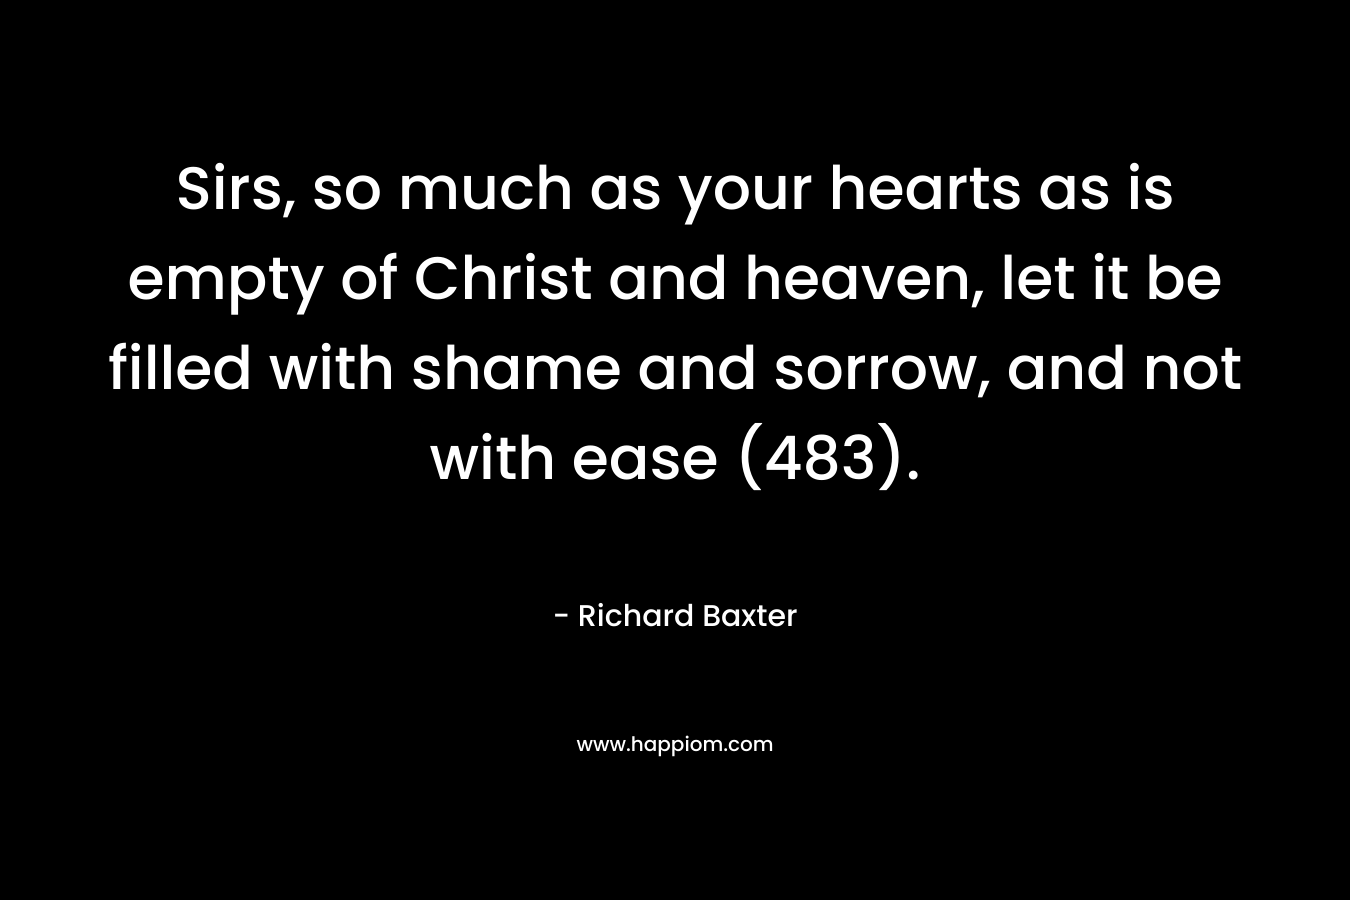 Sirs, so much as your hearts as is empty of Christ and heaven, let it be filled with shame and sorrow, and not with ease (483). – Richard Baxter